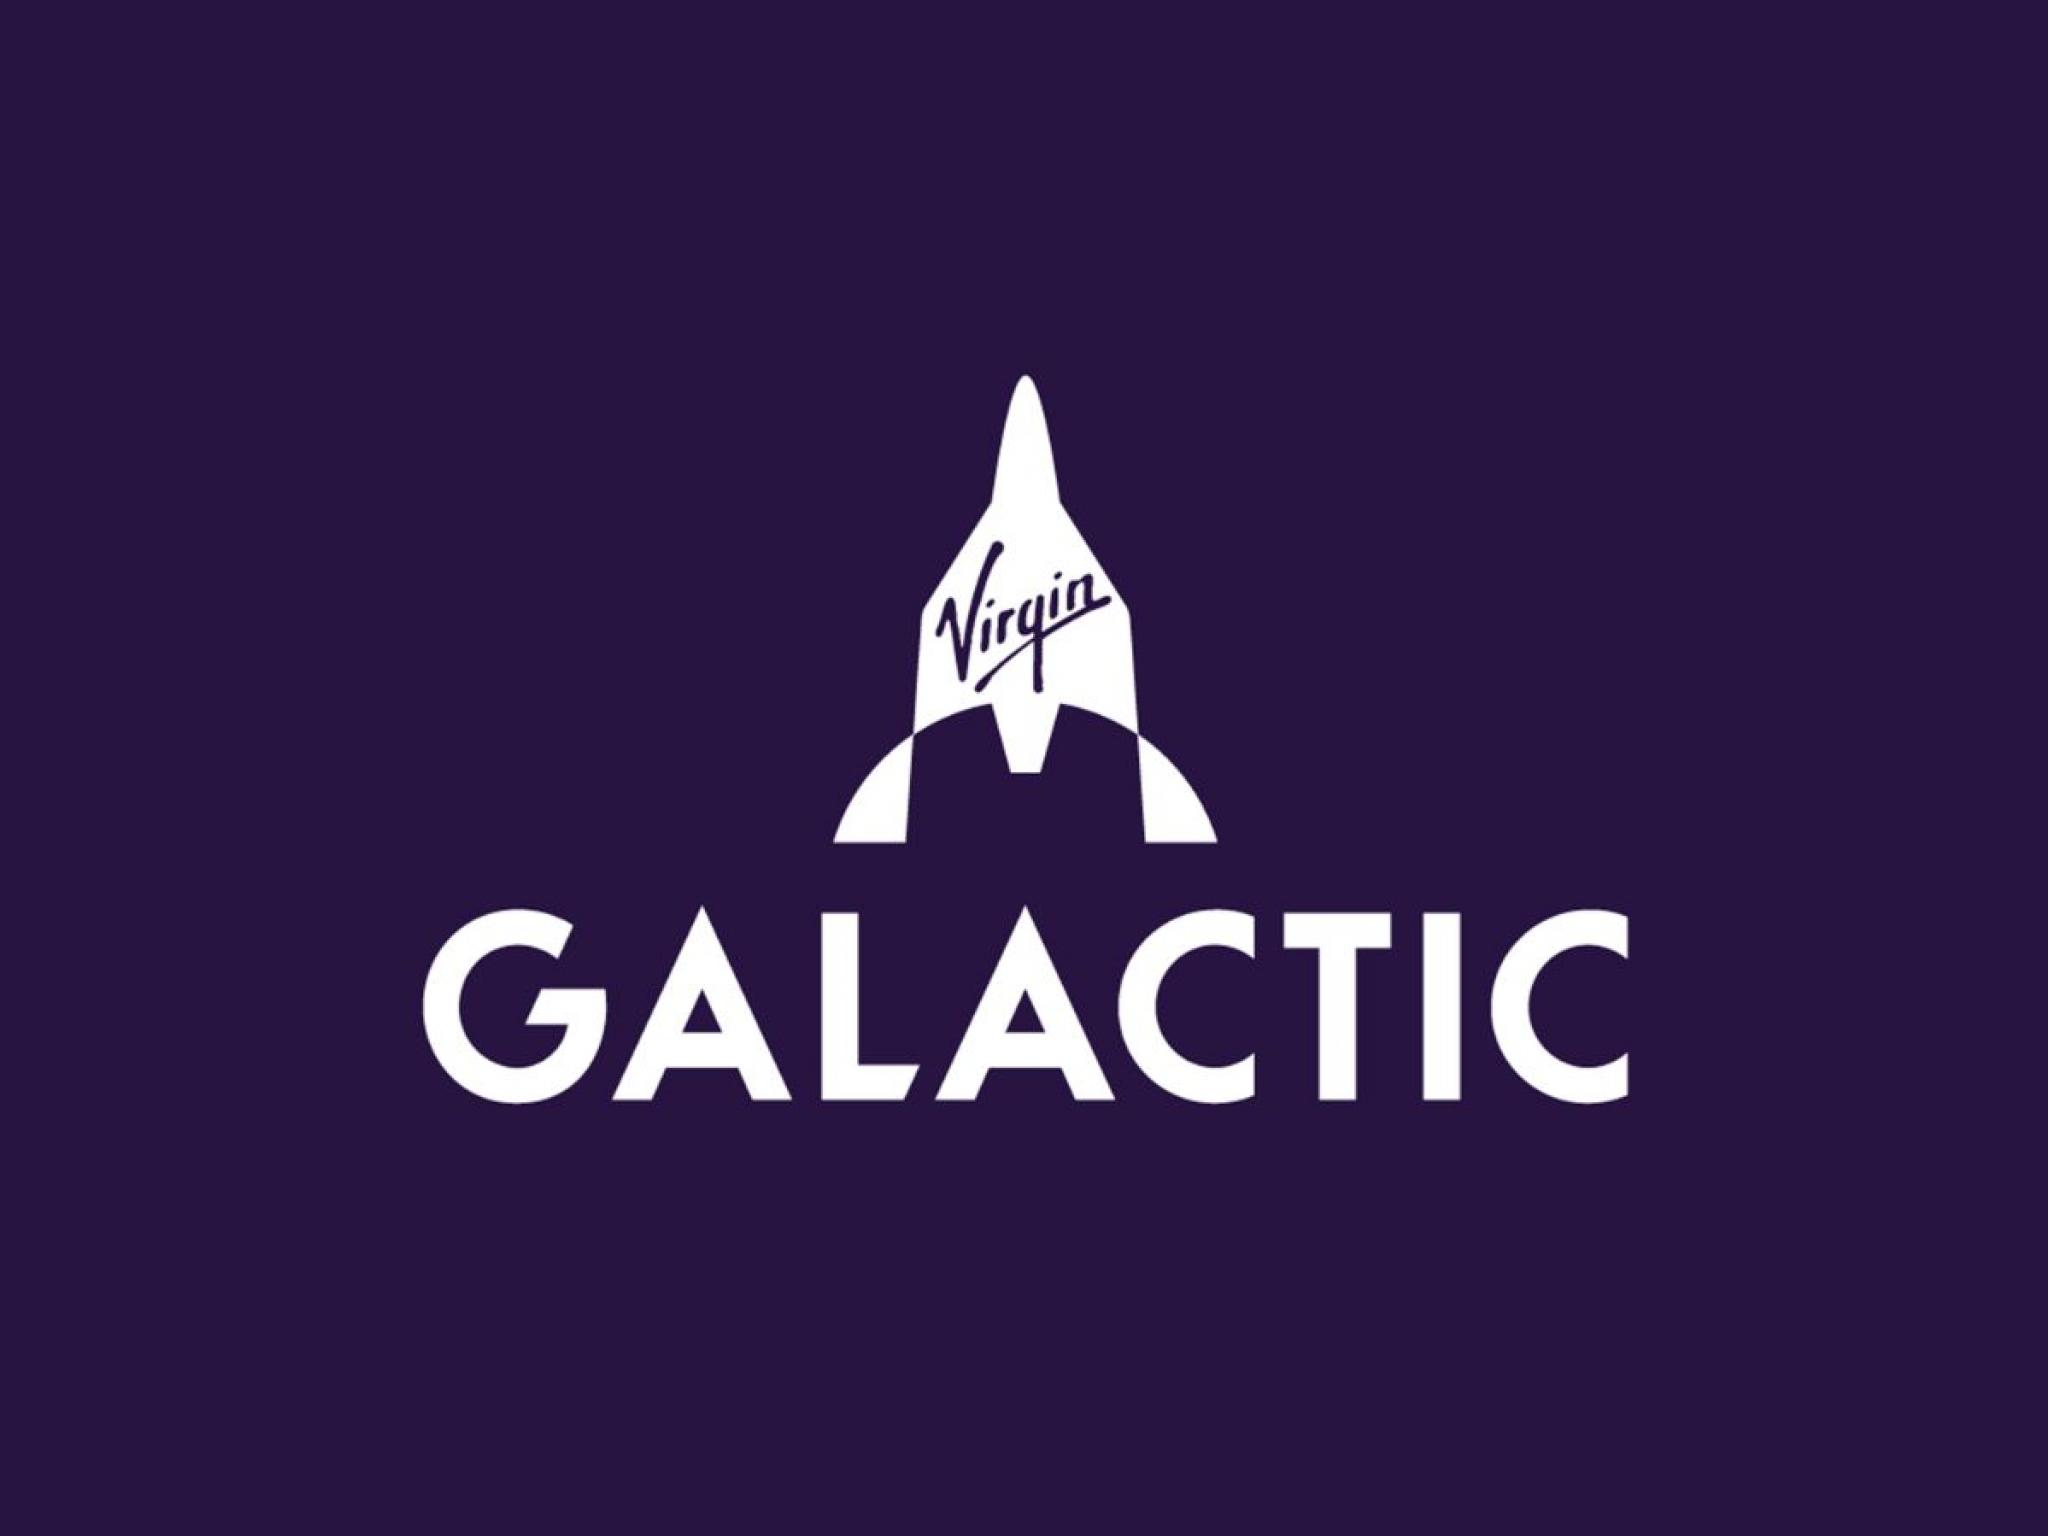  why-virgin-galactic-are-trading-lower-by-around-18-here-are-20-stocks-moving-premarket 